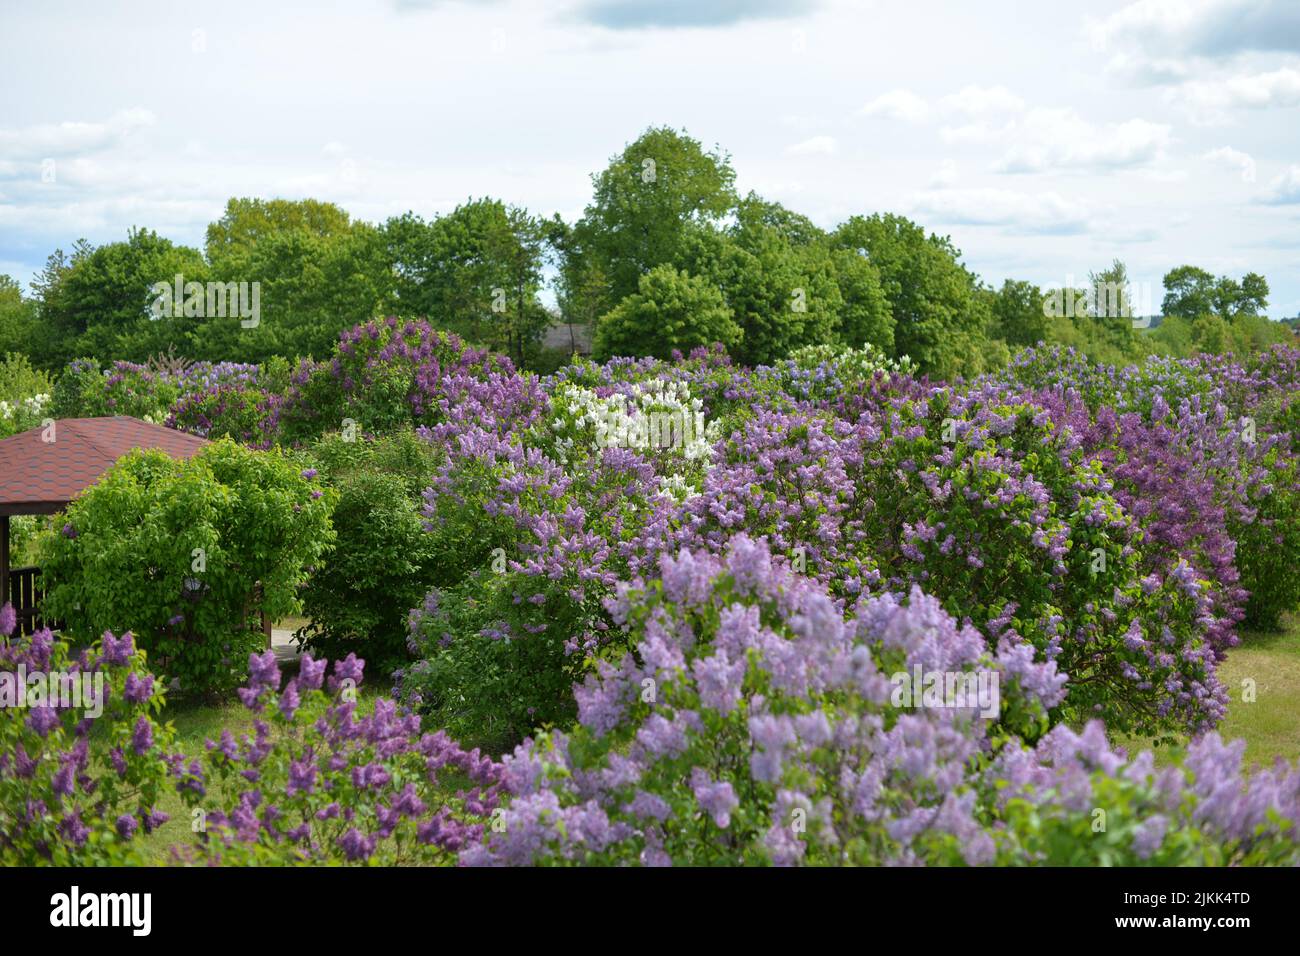 The lilacs blooming in a garden Stock Photo